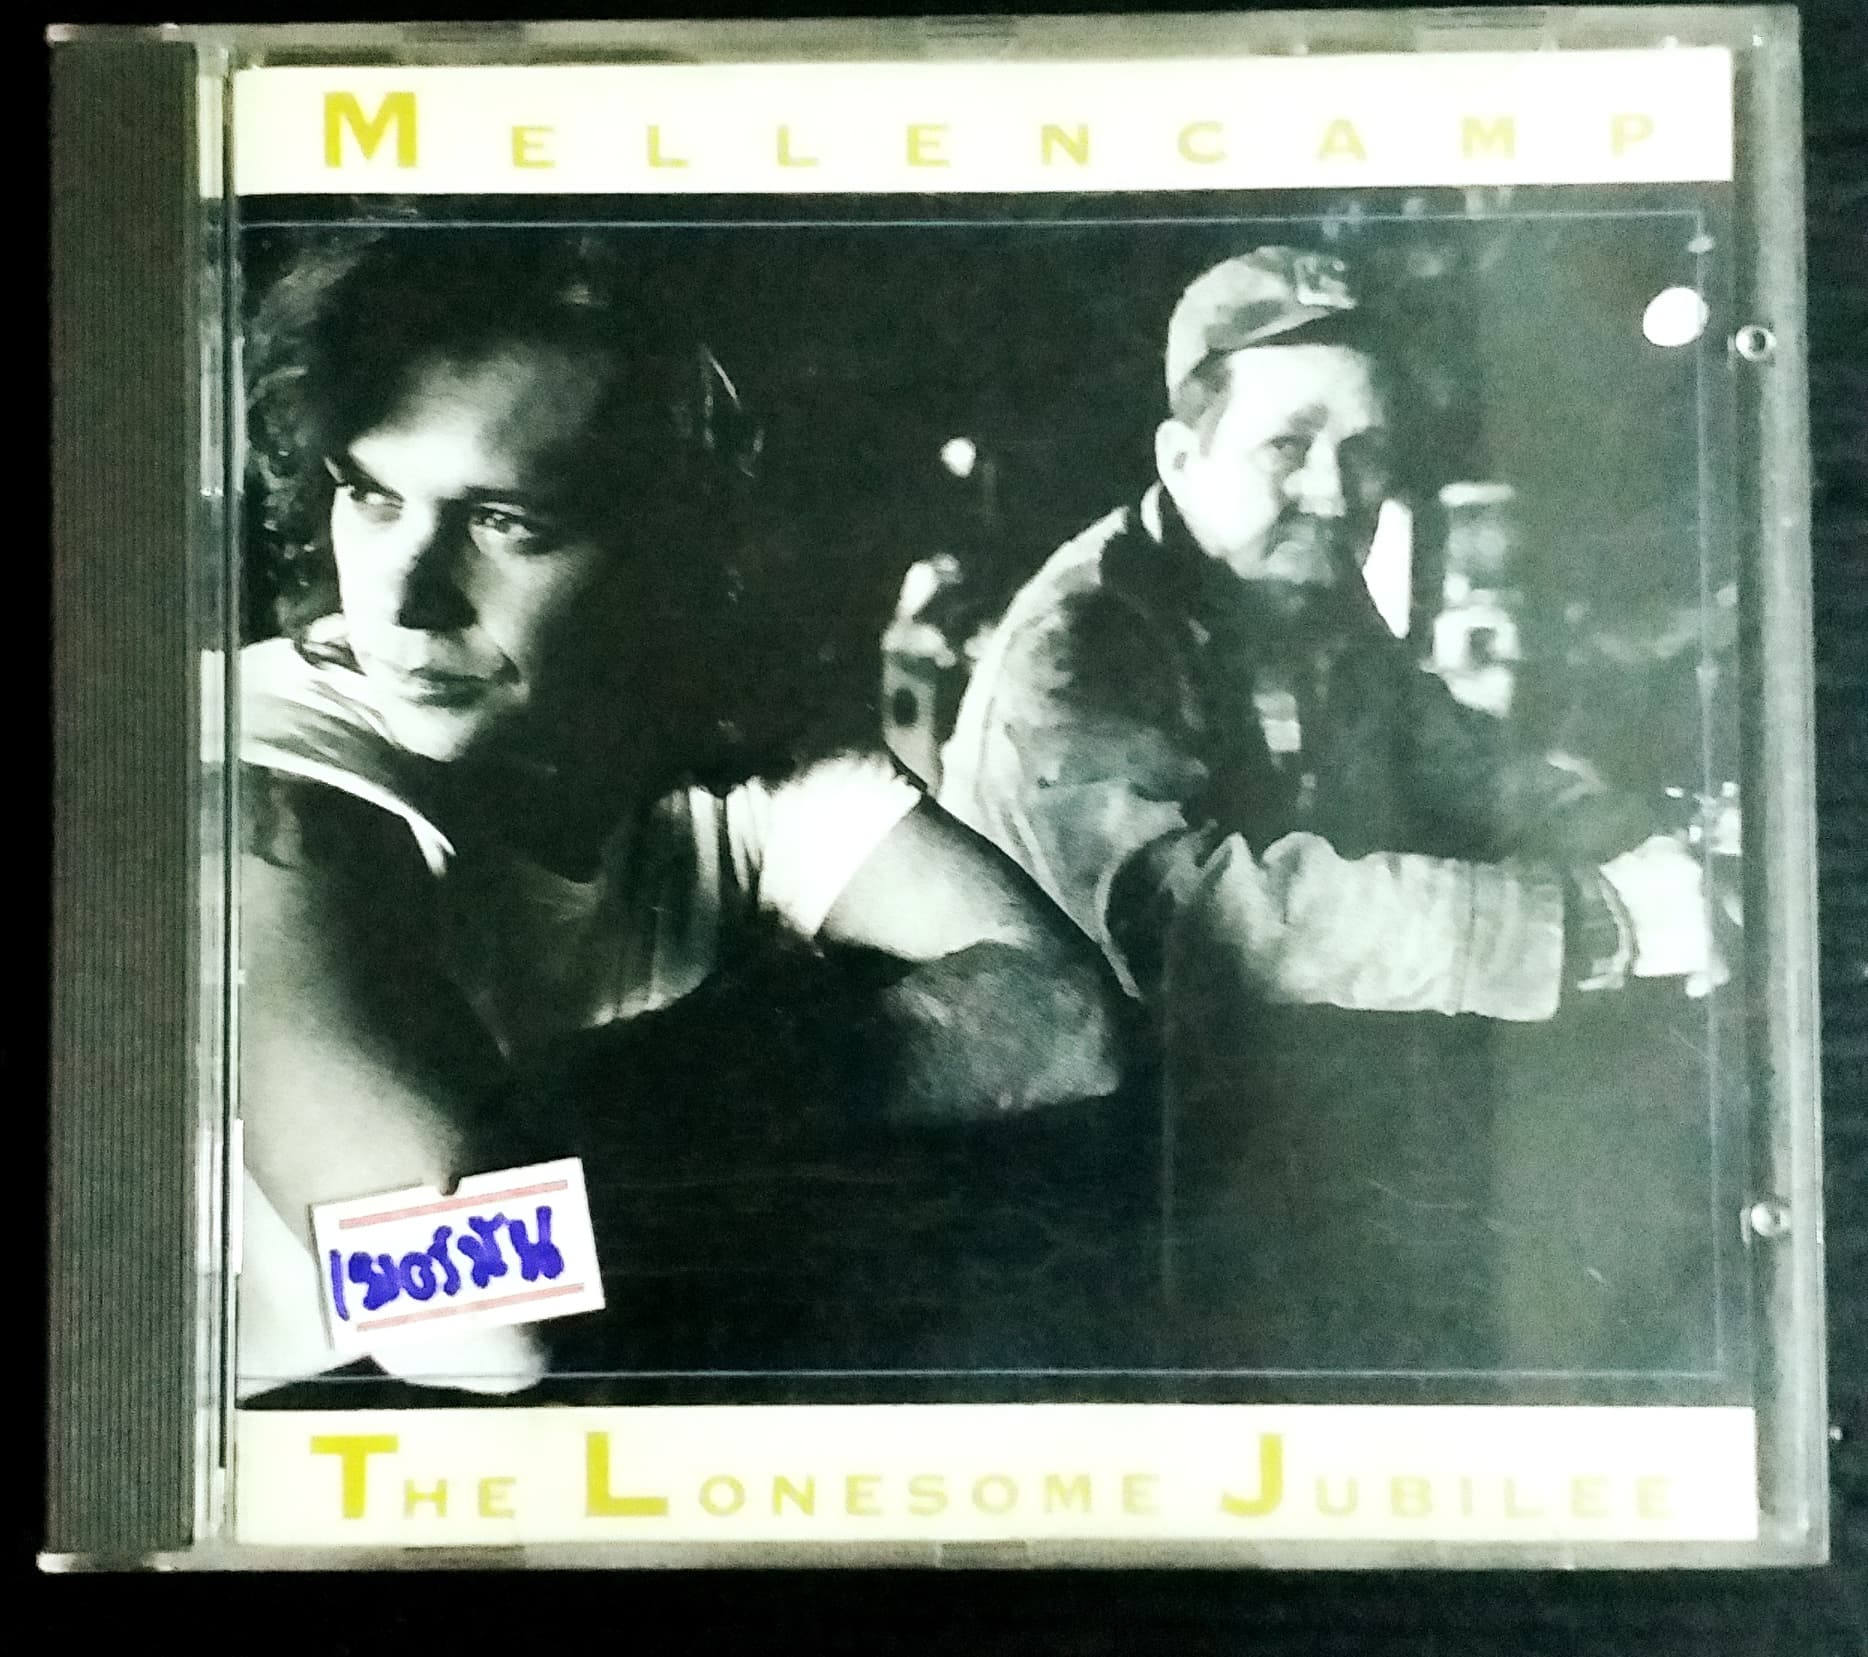 CD MELLENCAMP THE LONESOME JUBILEE MADE IN เยอรมัน